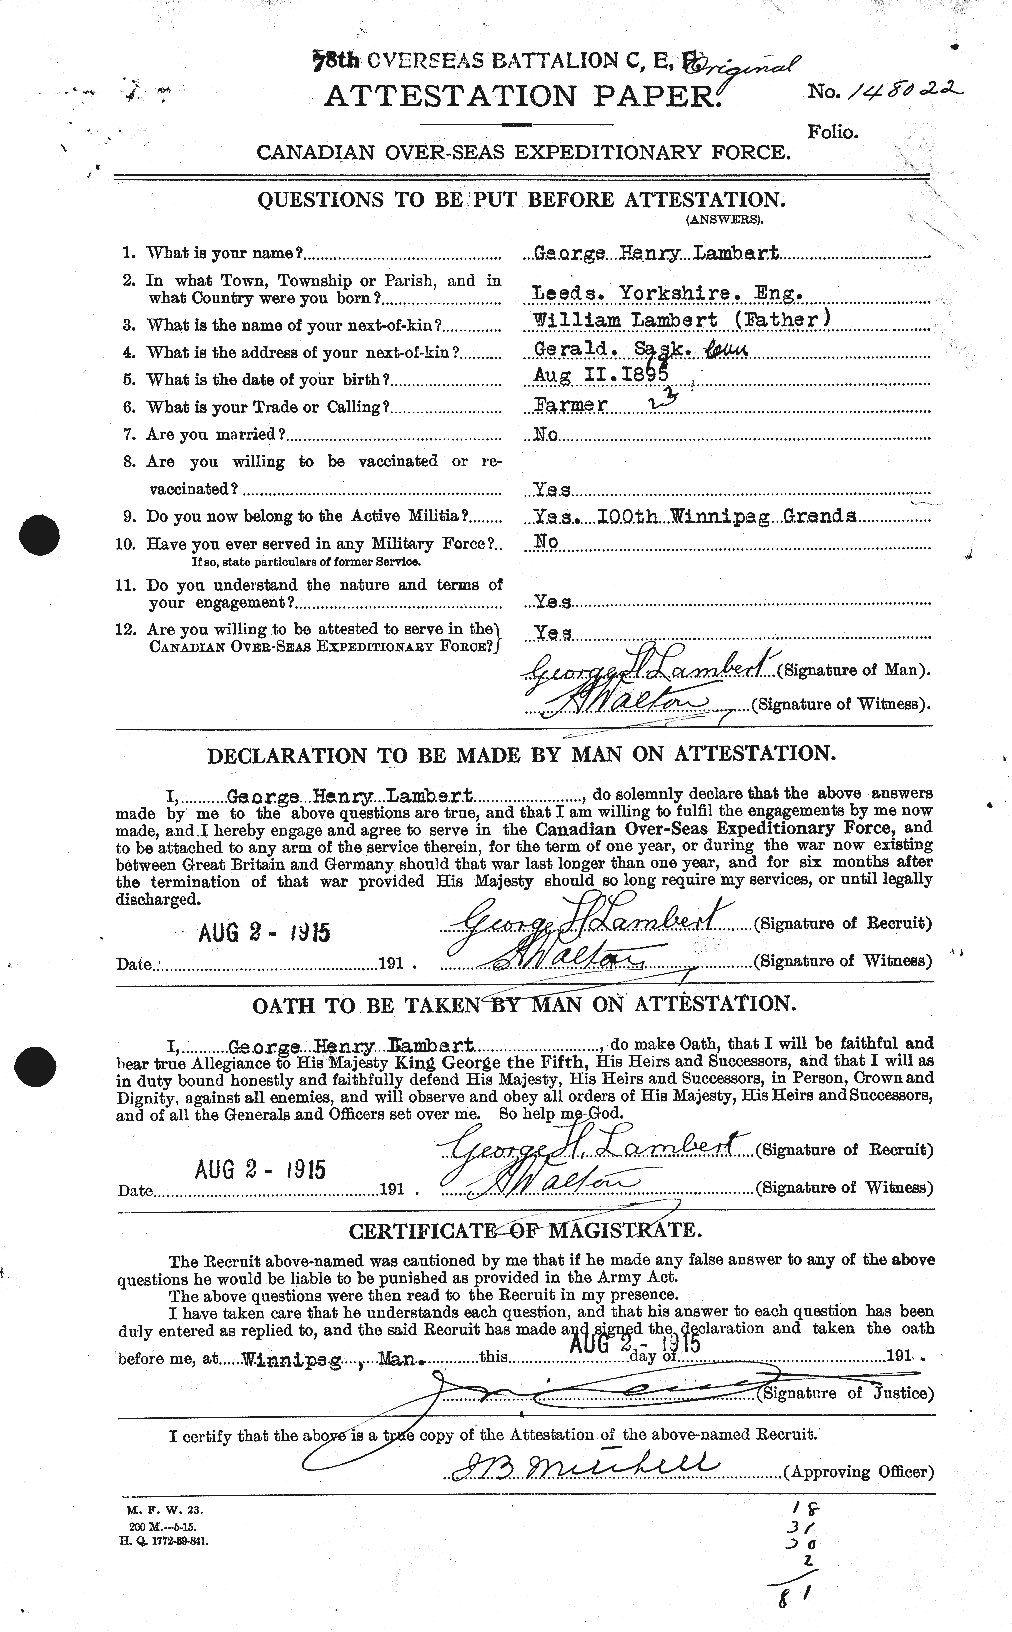 Personnel Records of the First World War - CEF 445736a